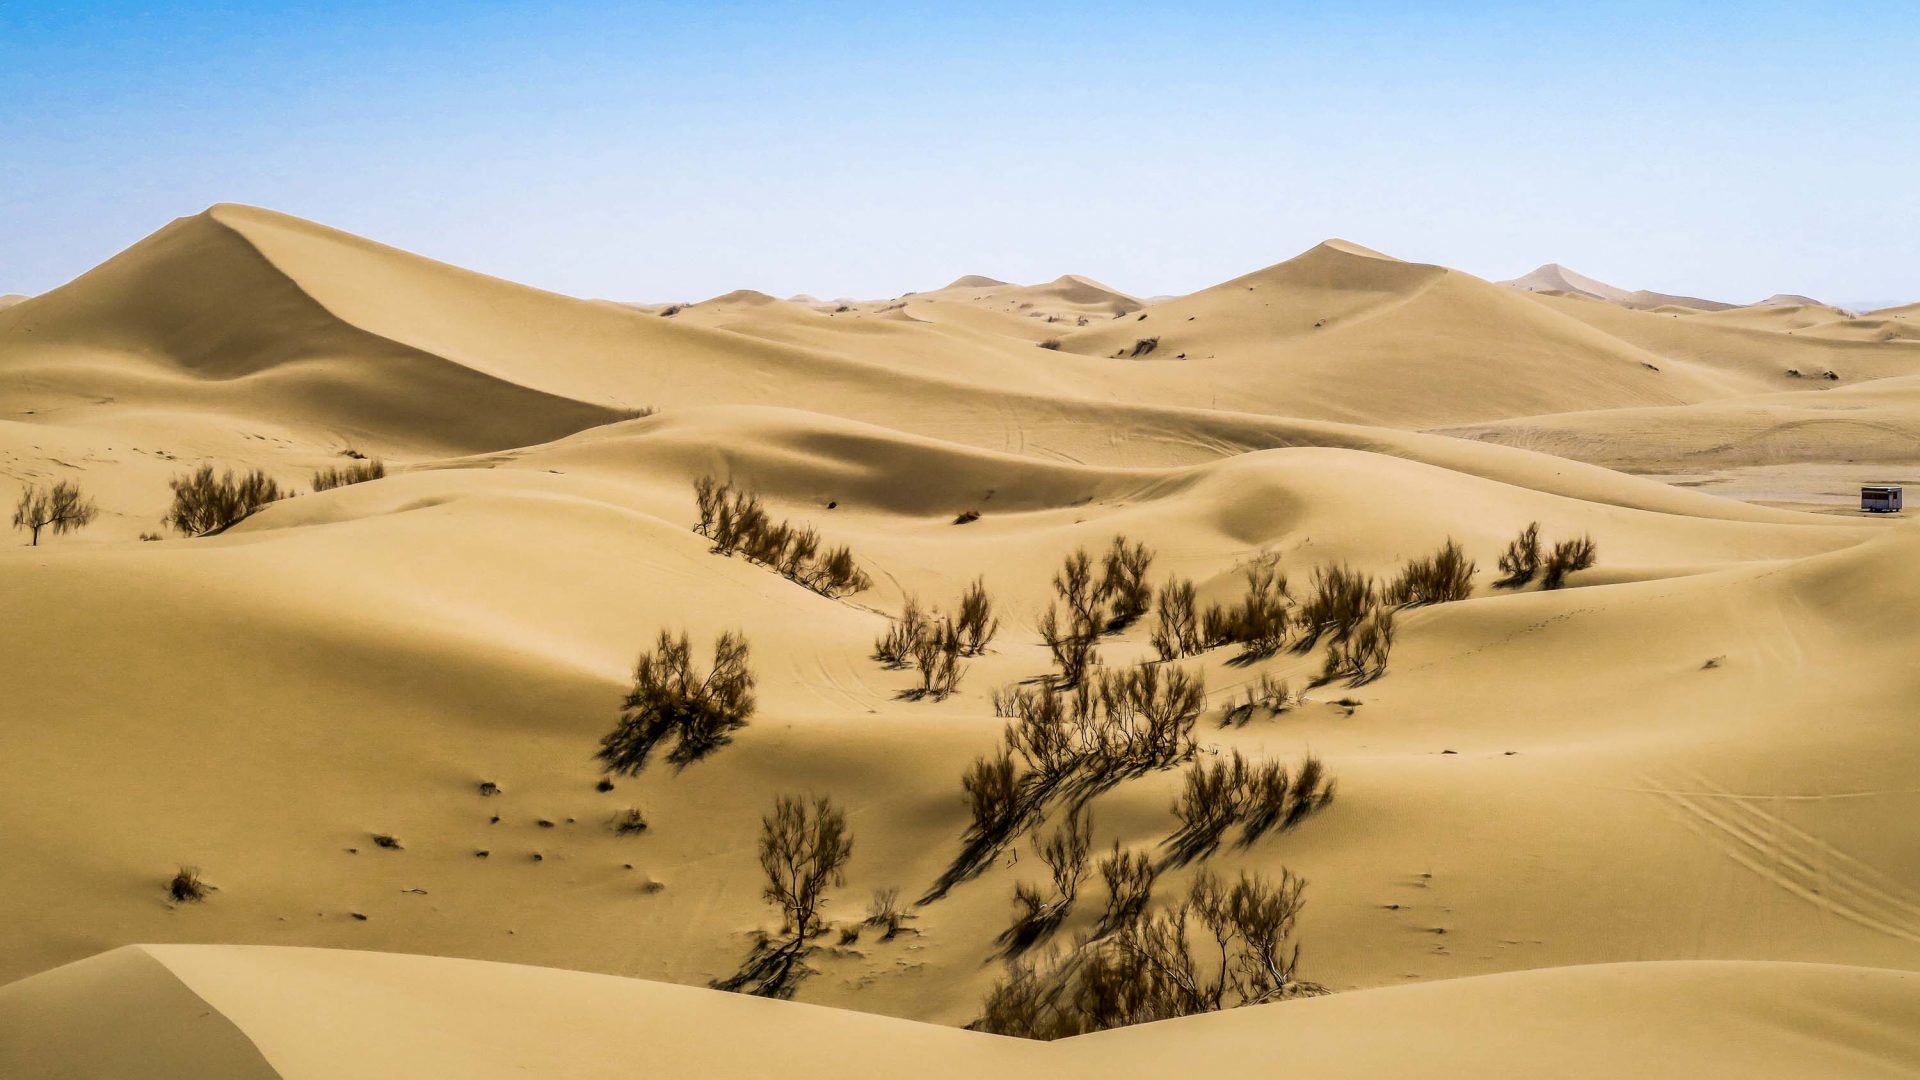 The sand dunes of Varzaneh.